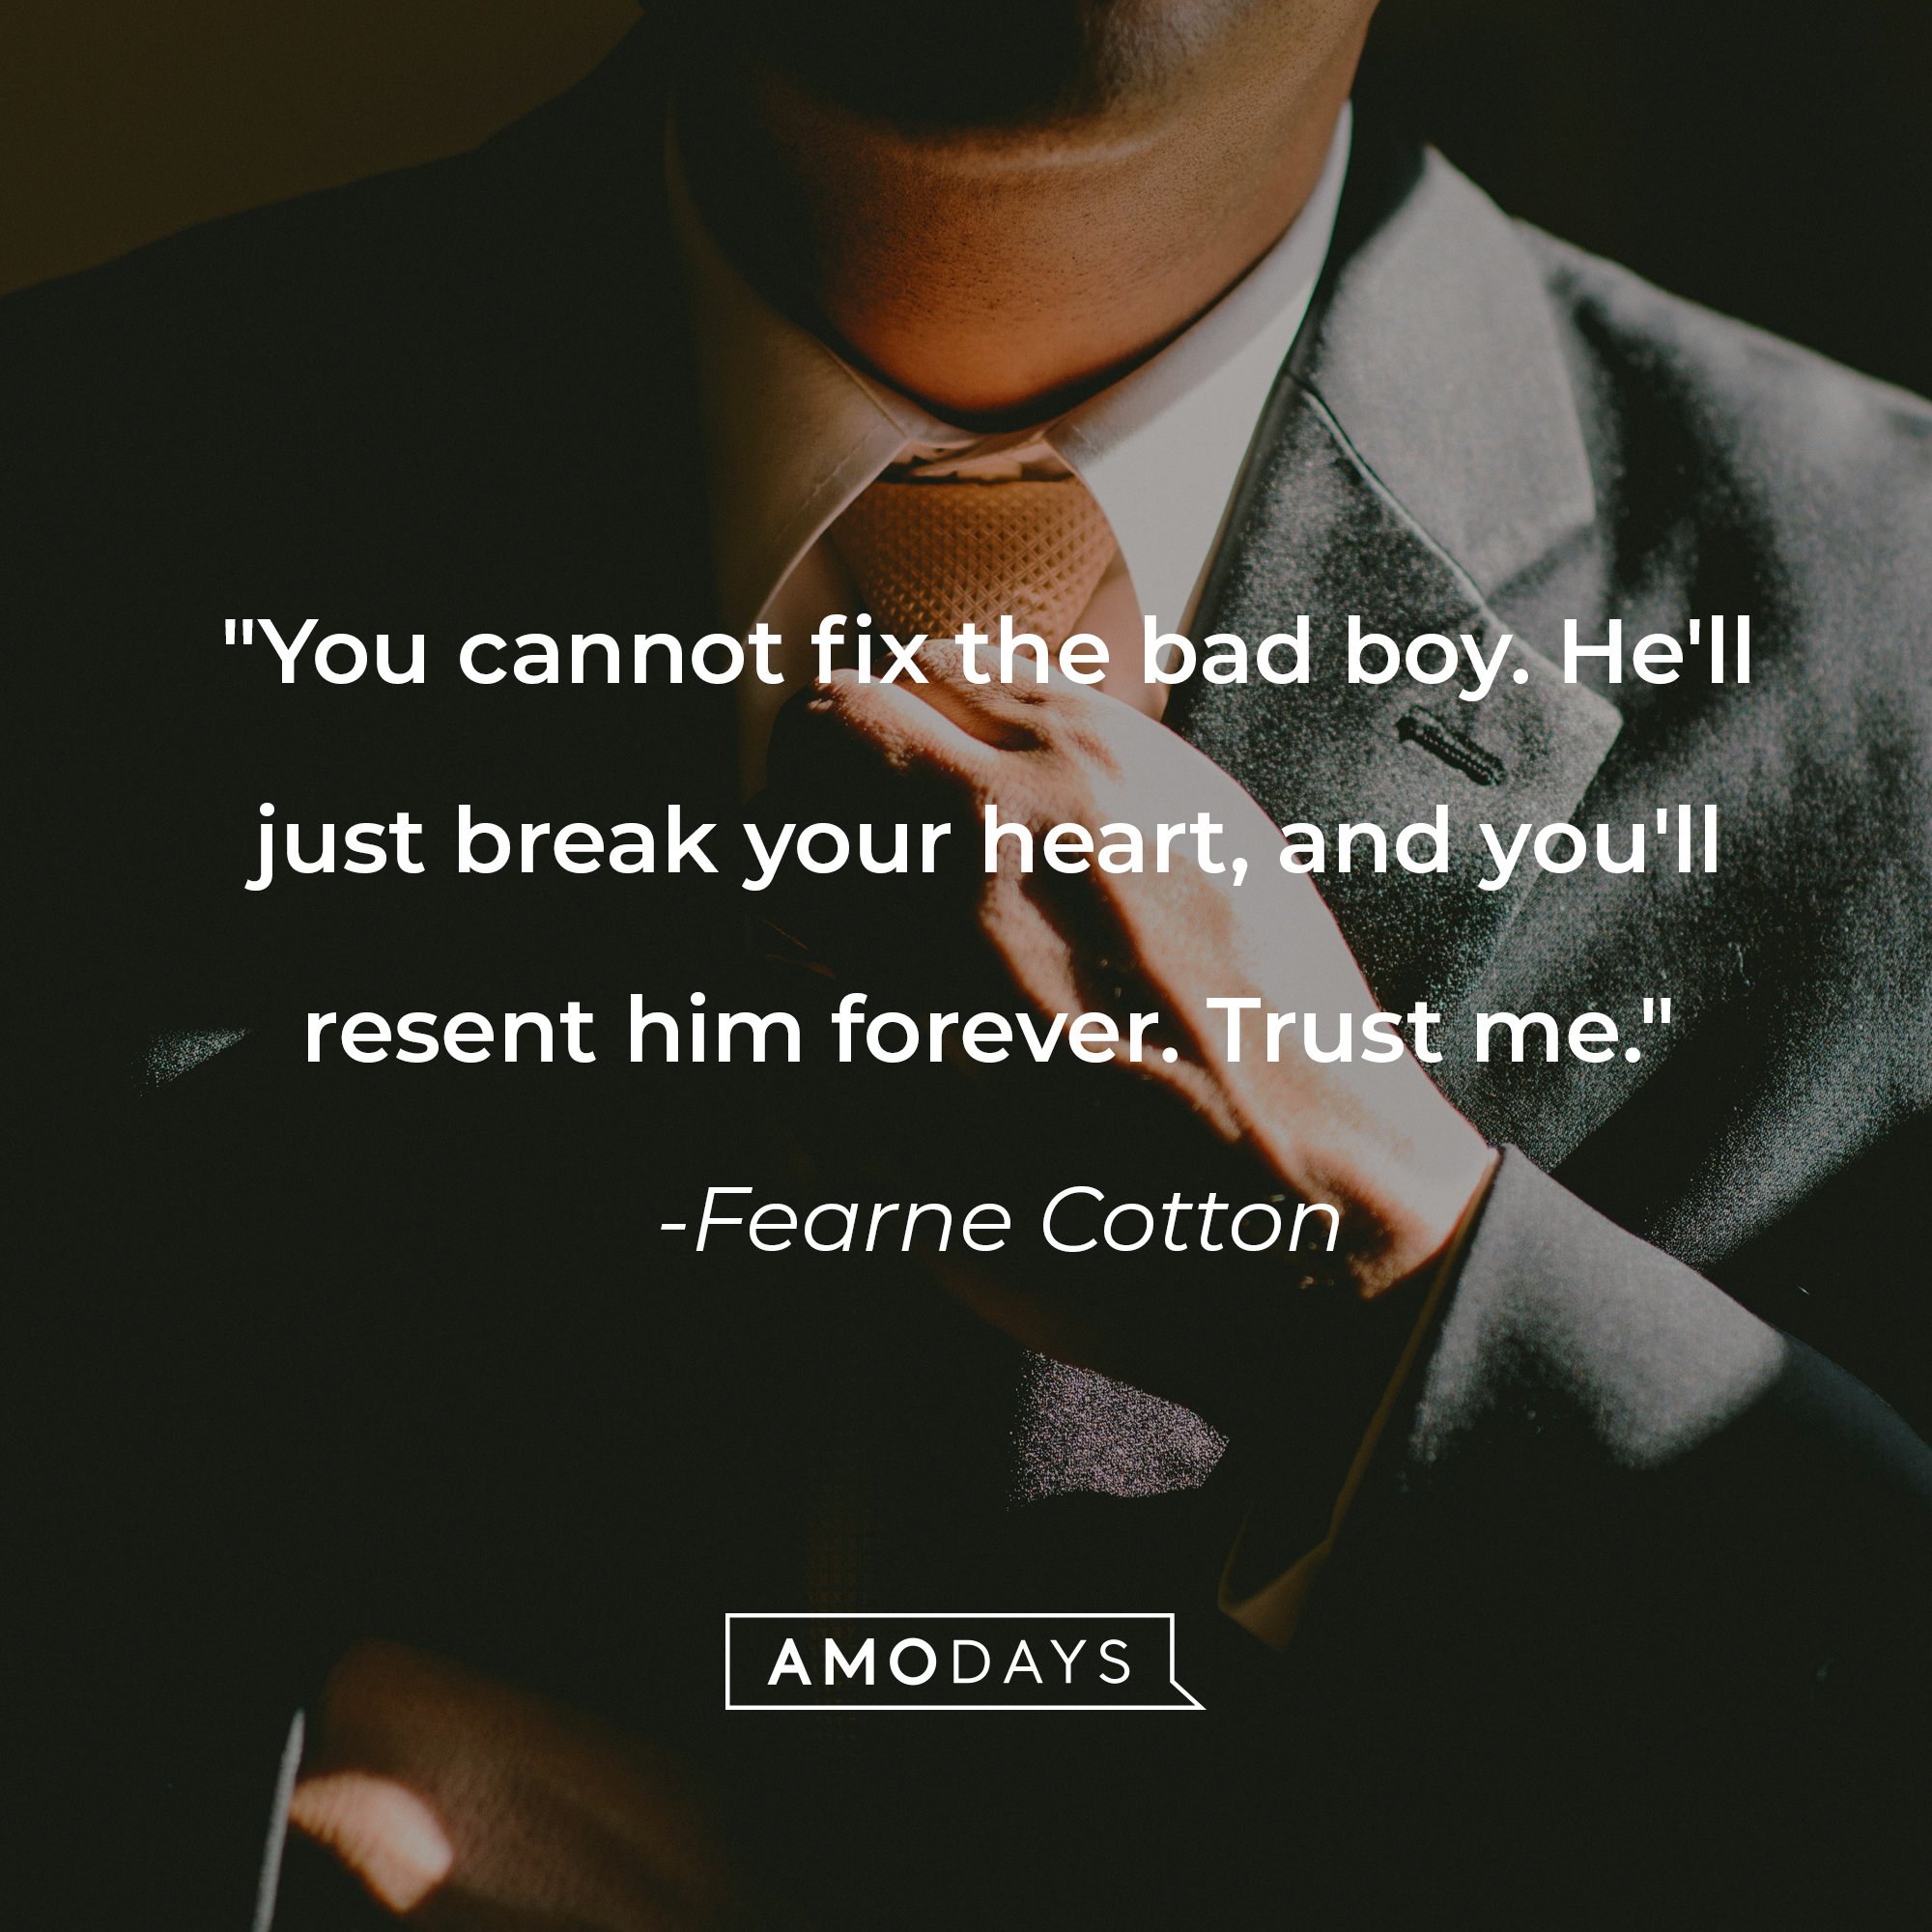 Fearne Cotton's quote: "You cannot fix the bad boy. He'll just break your heart, and you'll resent him forever. Trust me." | Image: AmoDays